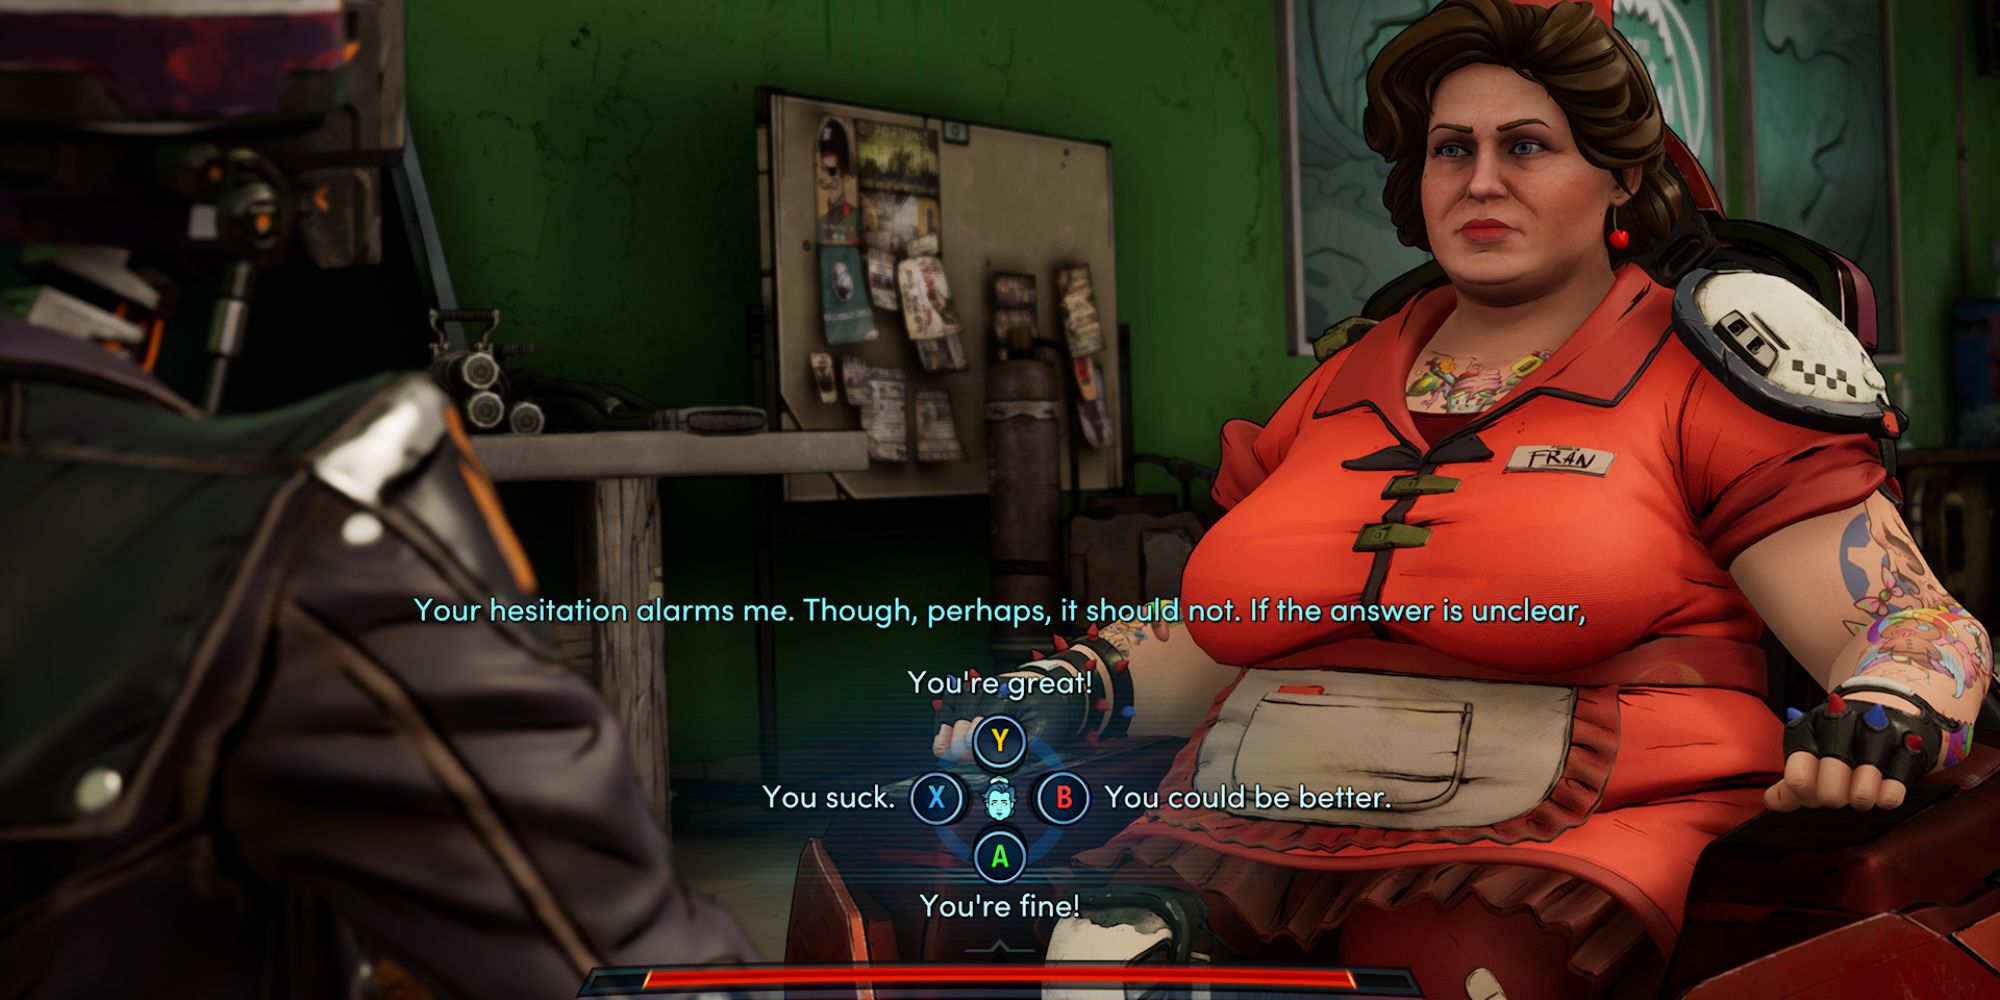 New Tales From The Borderlands Screenshot Of Fran Speaks With LOU13